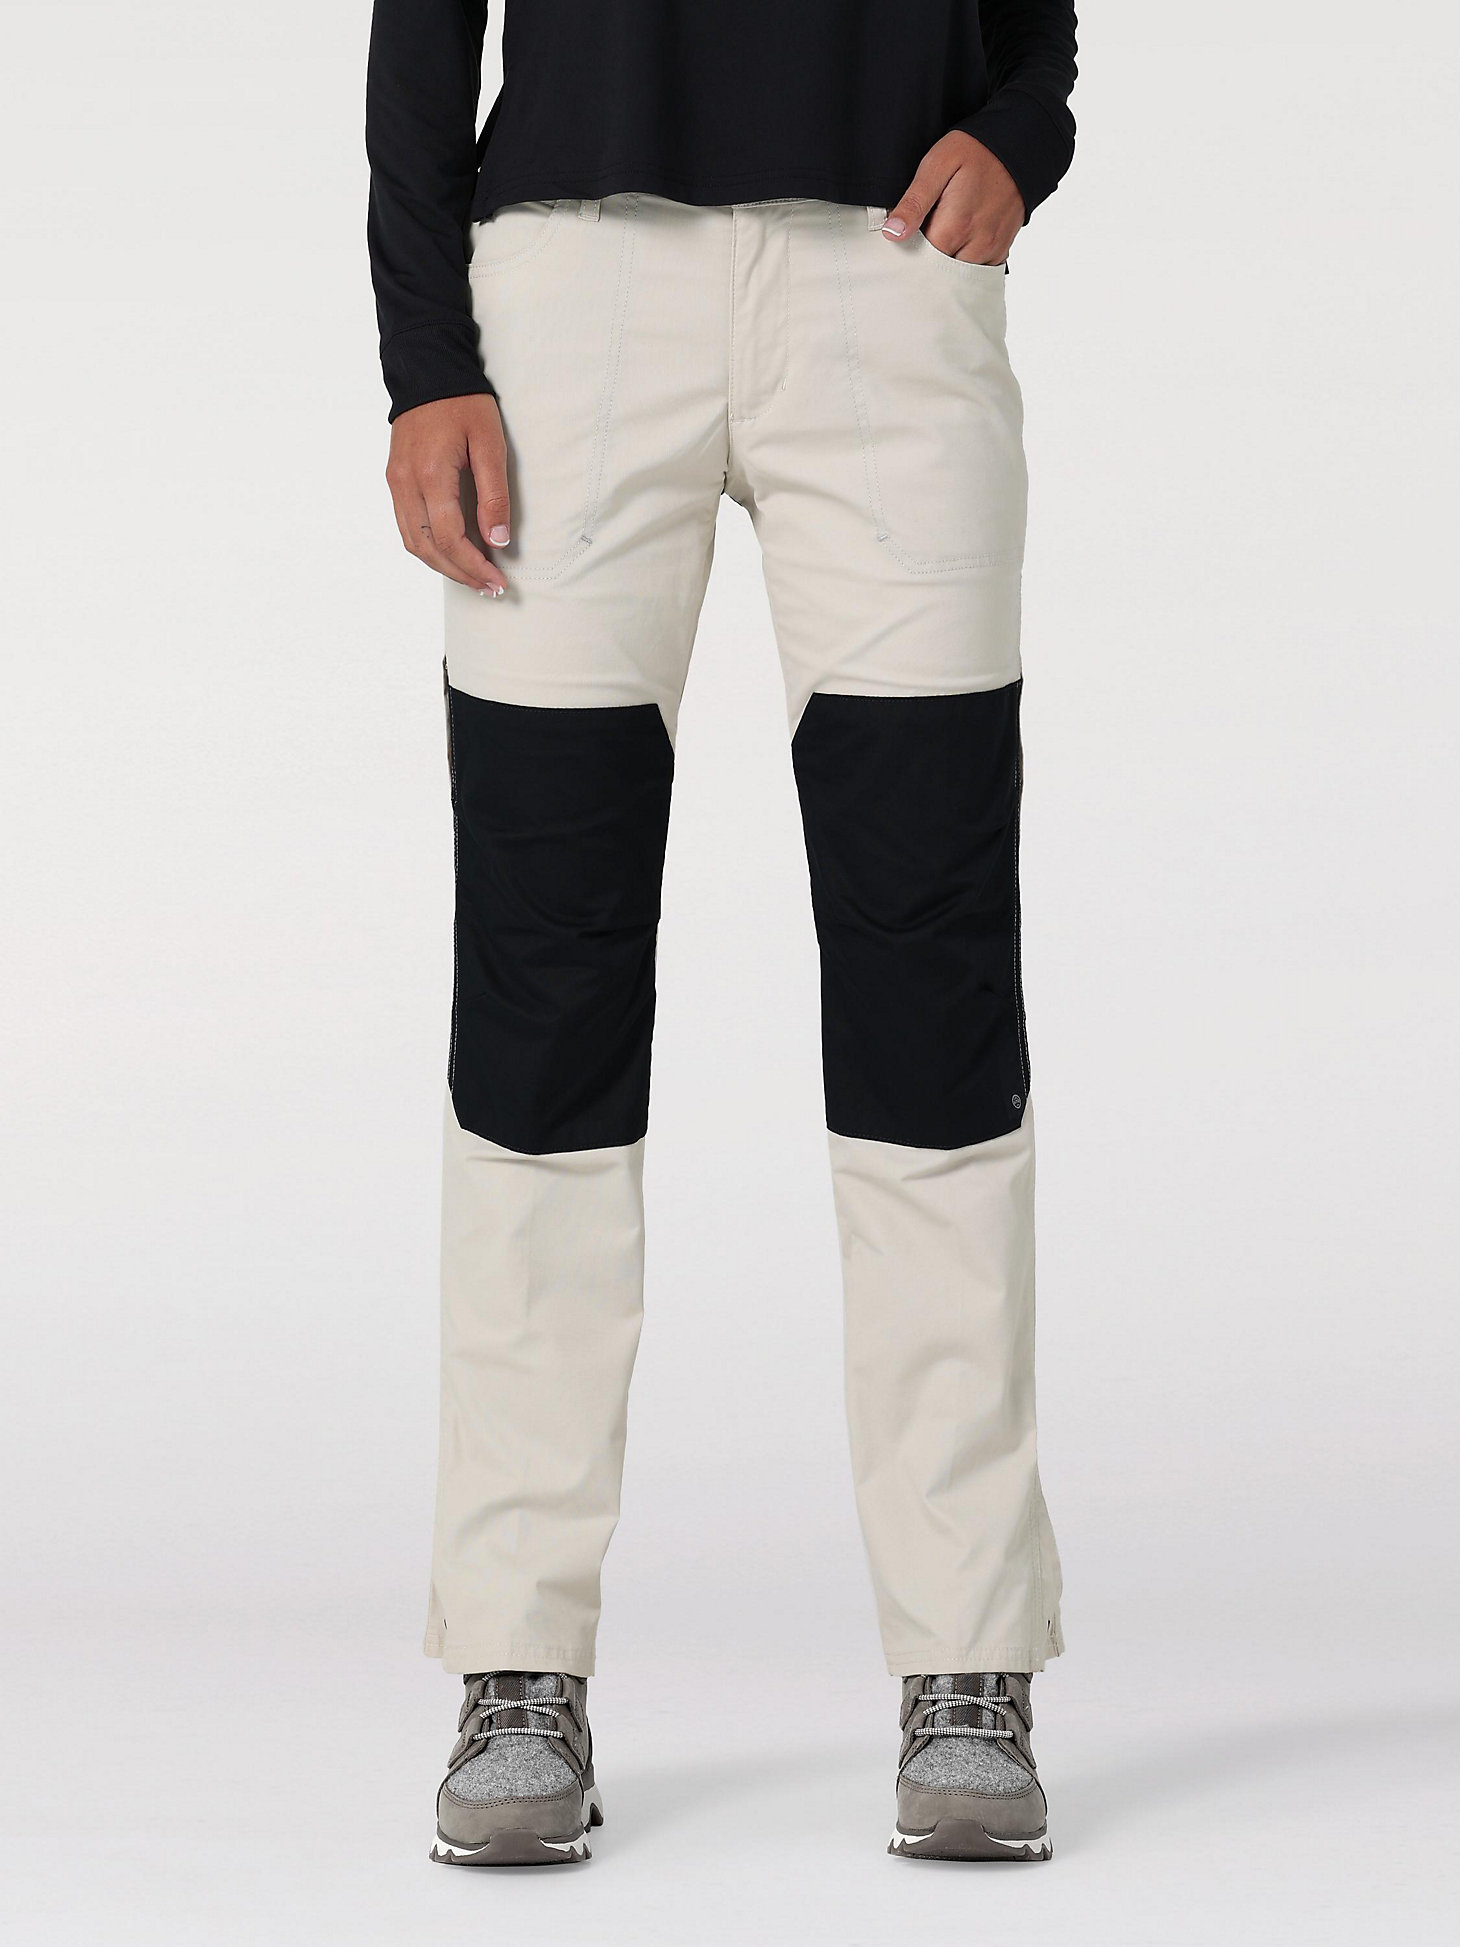 Reinforced Softshell Pant in Elmwood main view